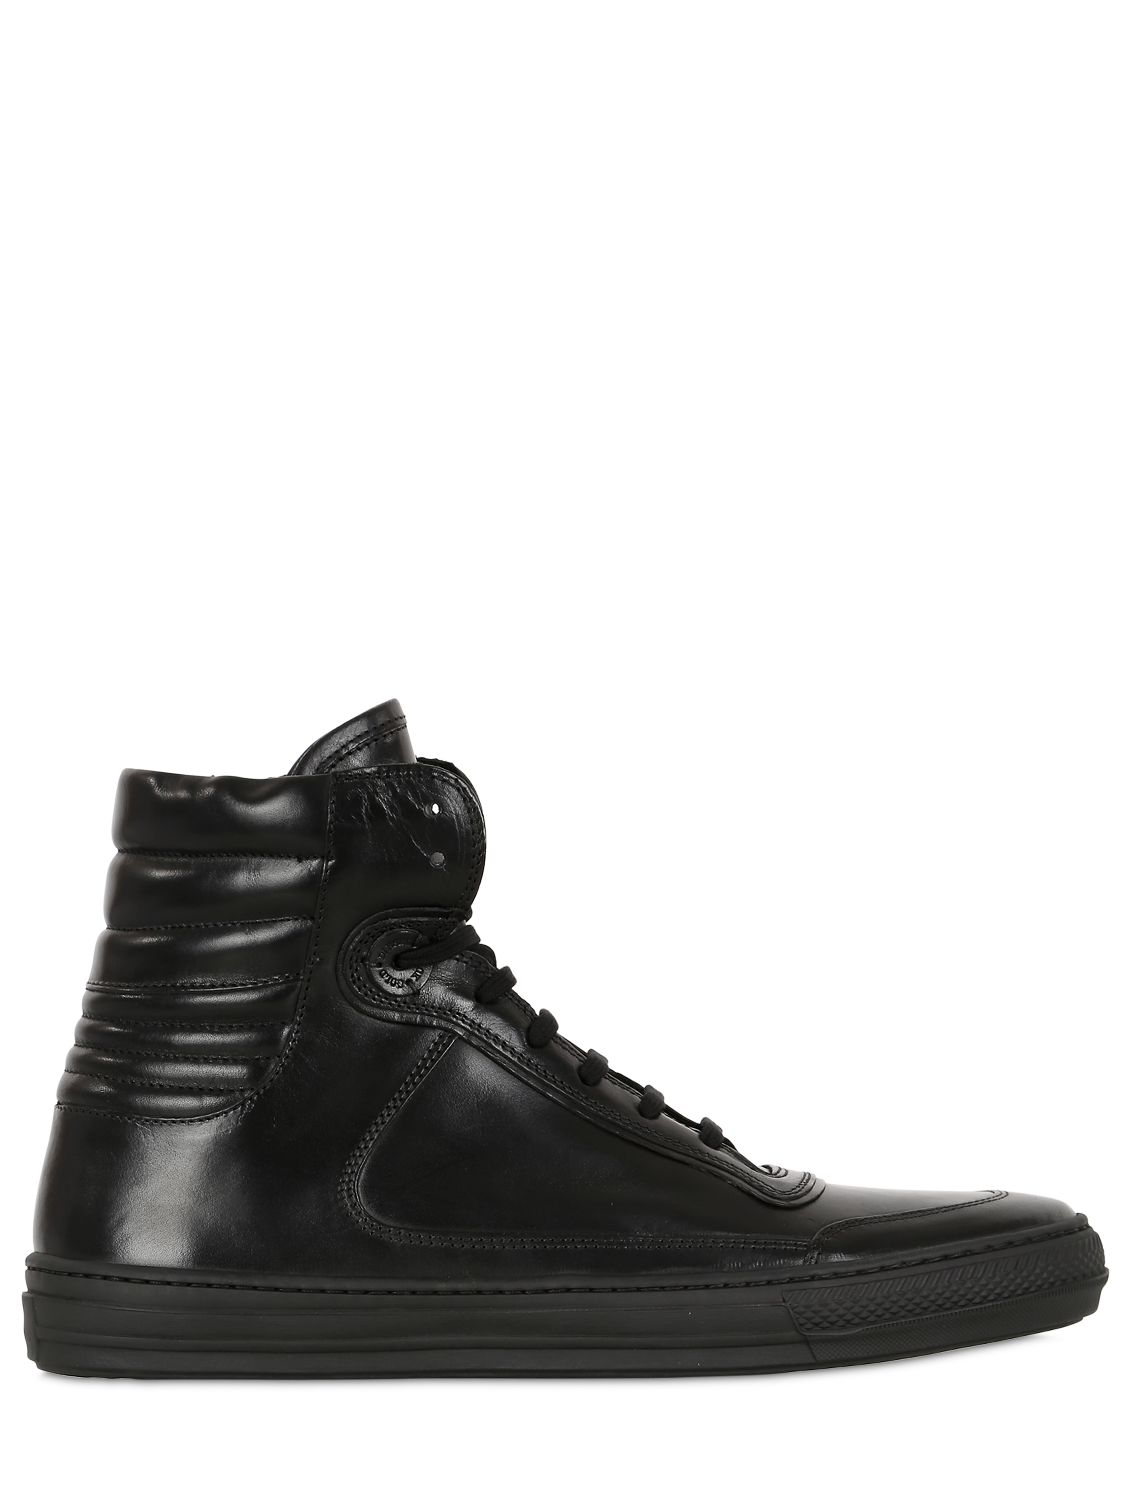 Lyst - Diesel Black Gold Smooth Leather High Top Sneakers in Black for Men